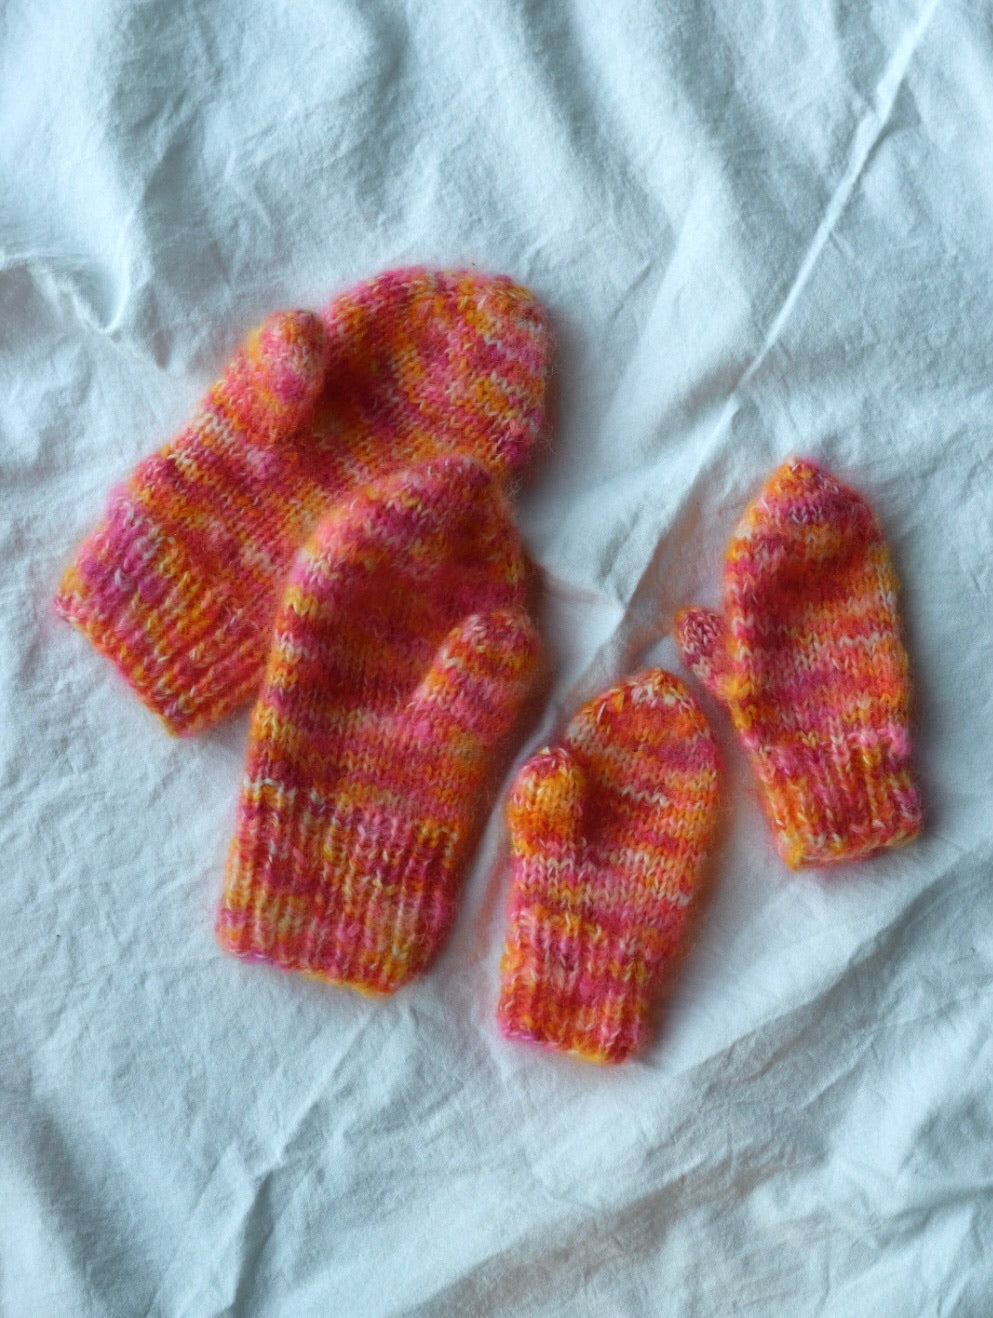 More mohair mittens